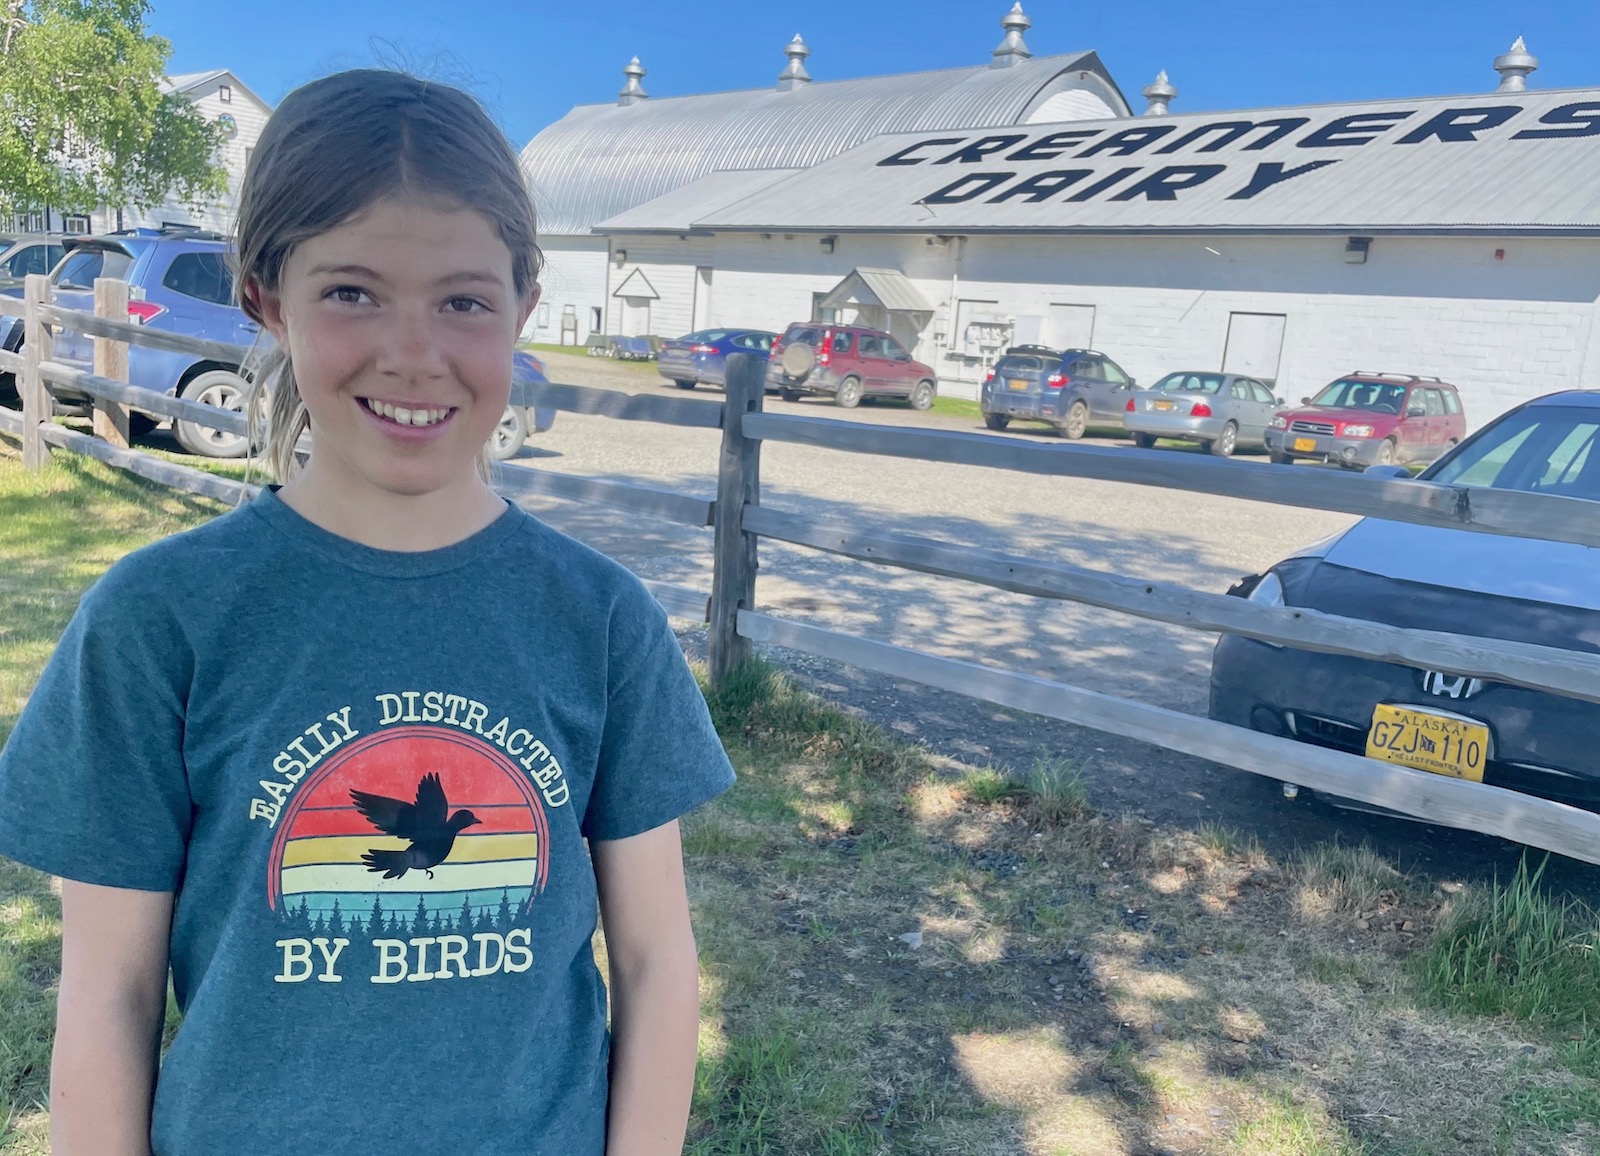 A girl stands near a parking area by restored dairy buildings. Her T-shirt reads "Easily distracted by birds."